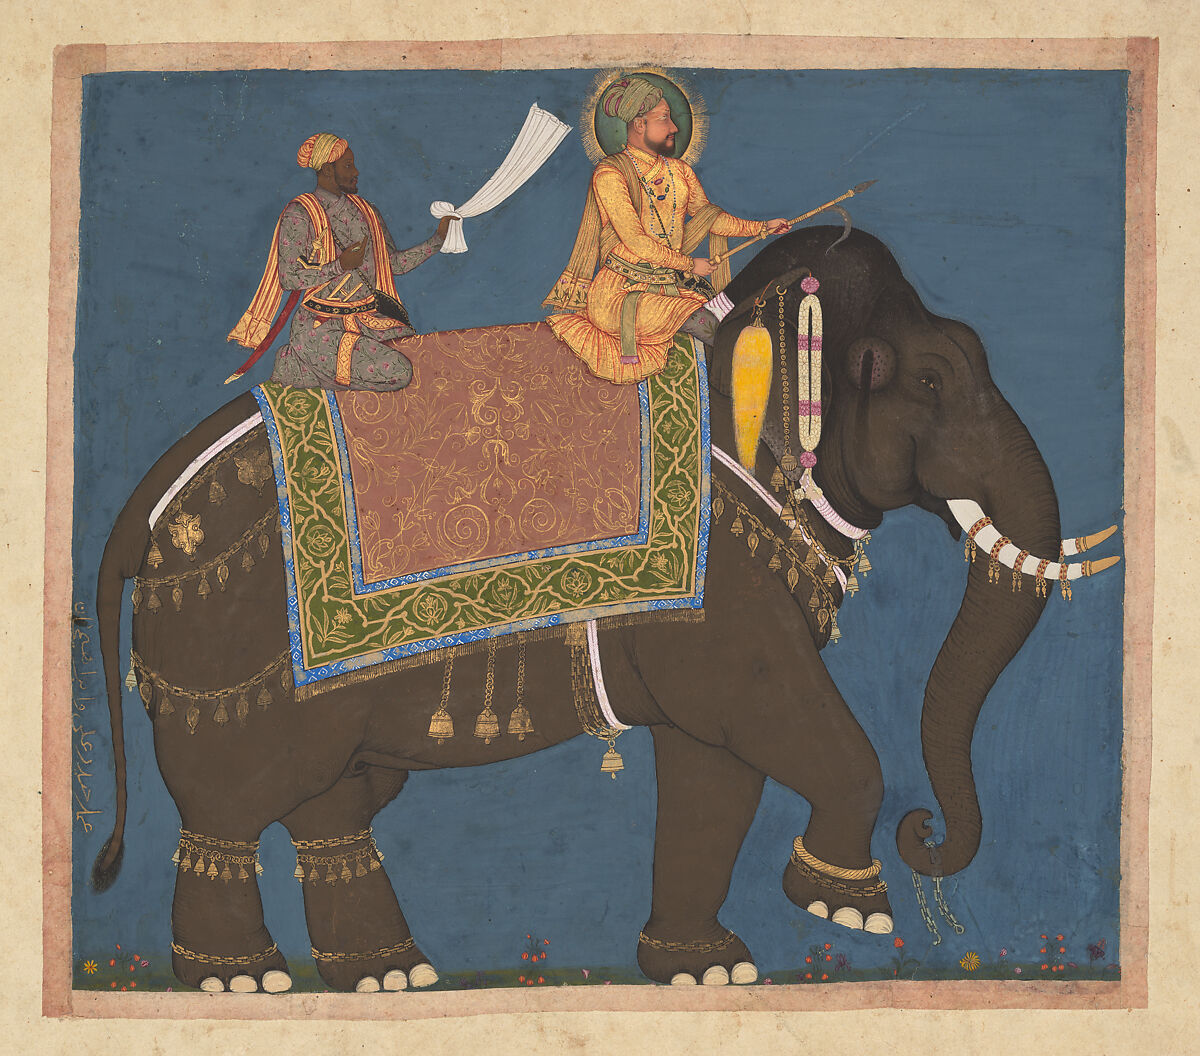 Sultan Muhammad 'Adil Shah and Ikhlas Khan Riding an Elephant, Haidar 'Ali  Indian, Ink, opaque watercolor, and gold on paper